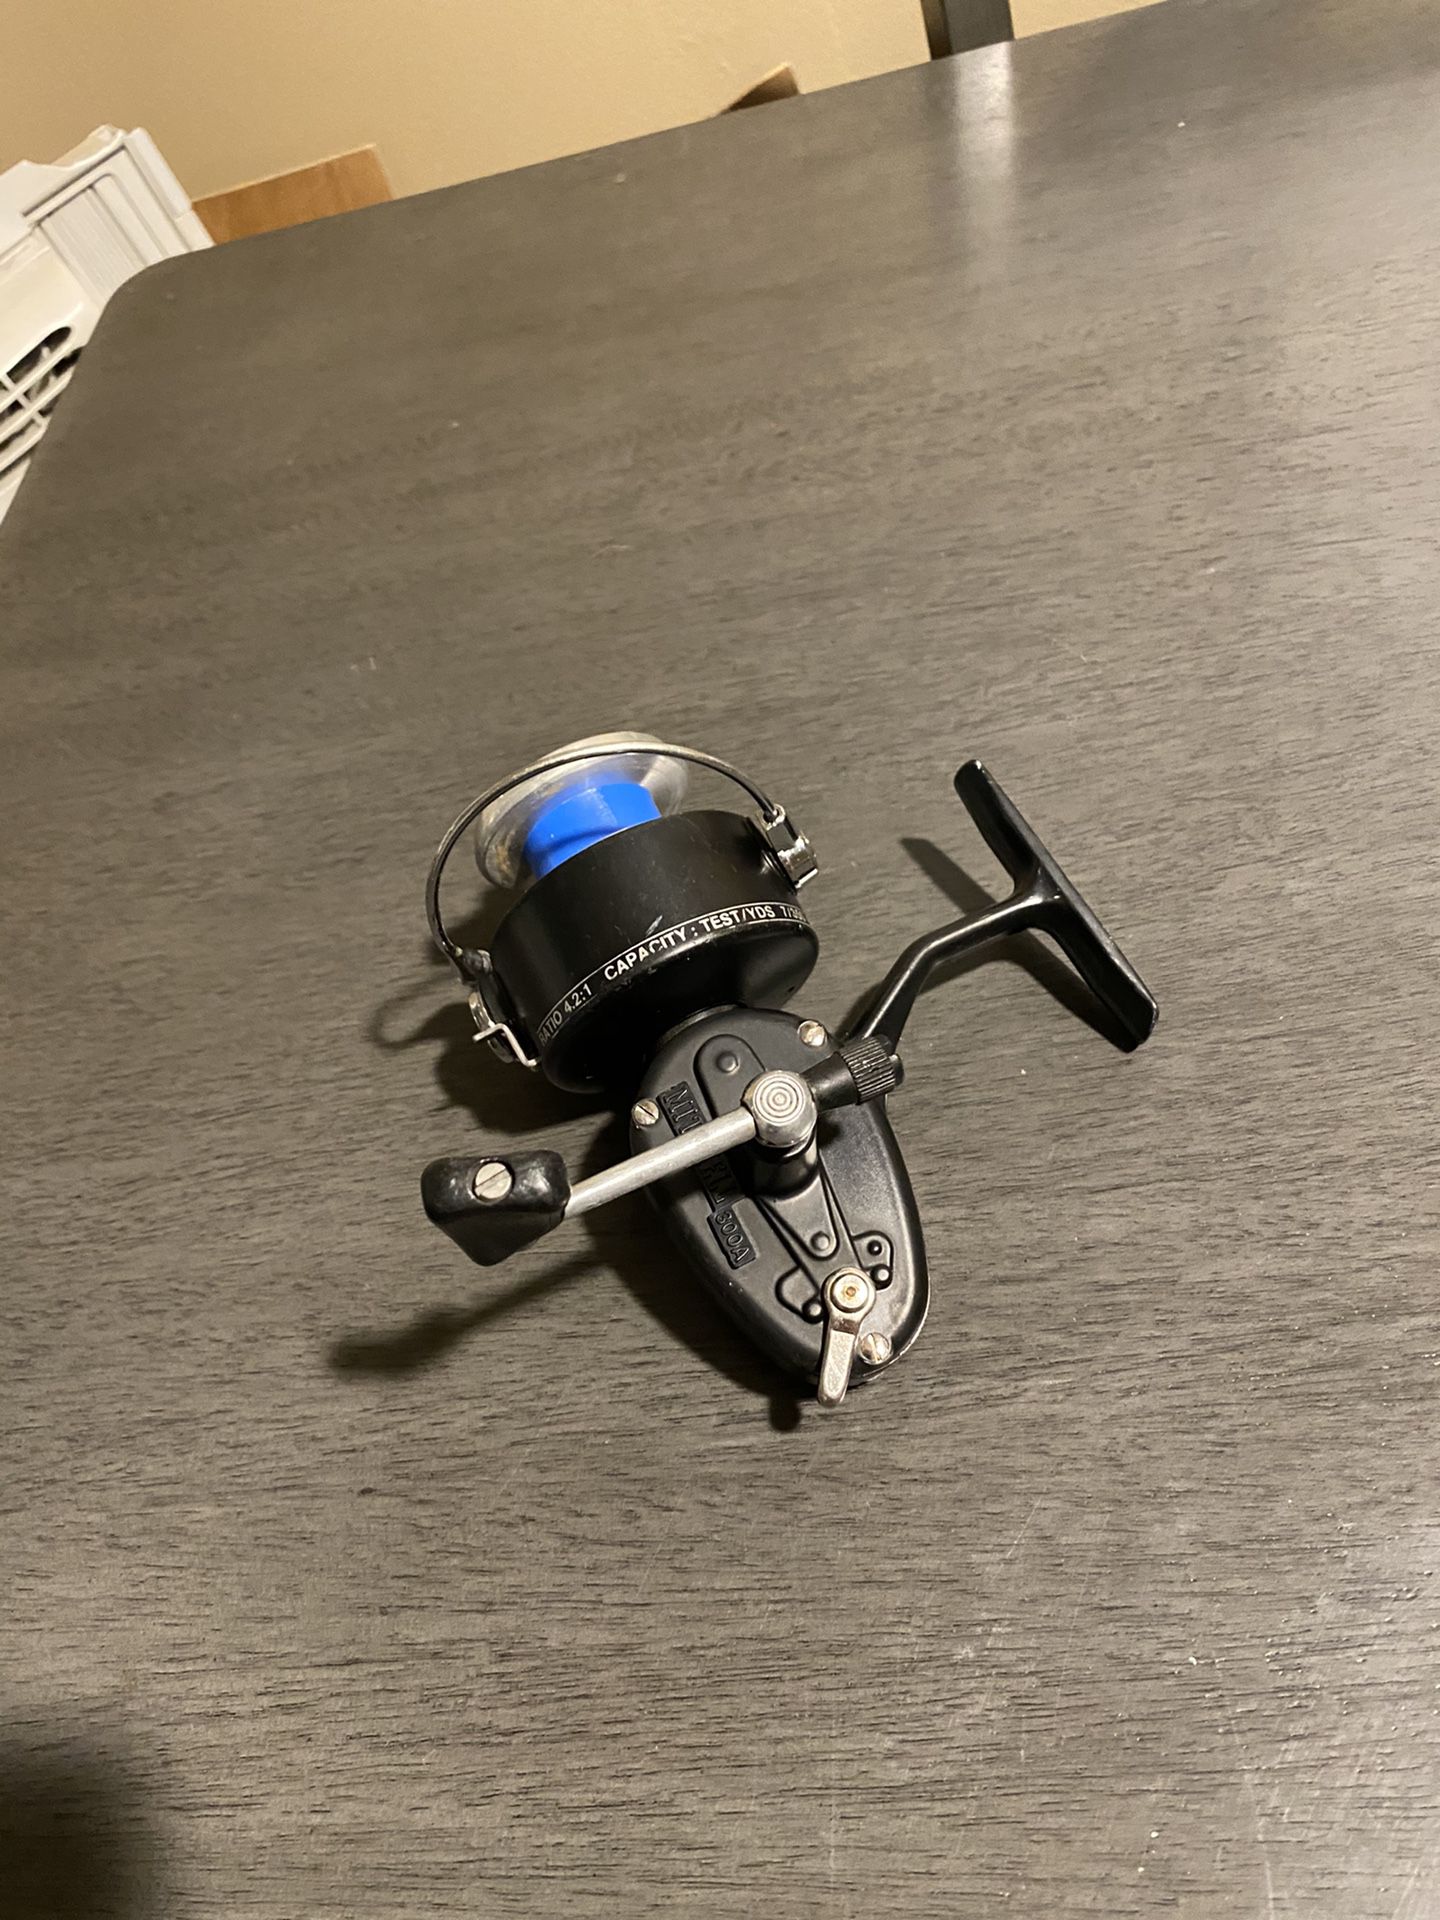 Garcia Mitchell 300a Spinning fishing reel all metal gears